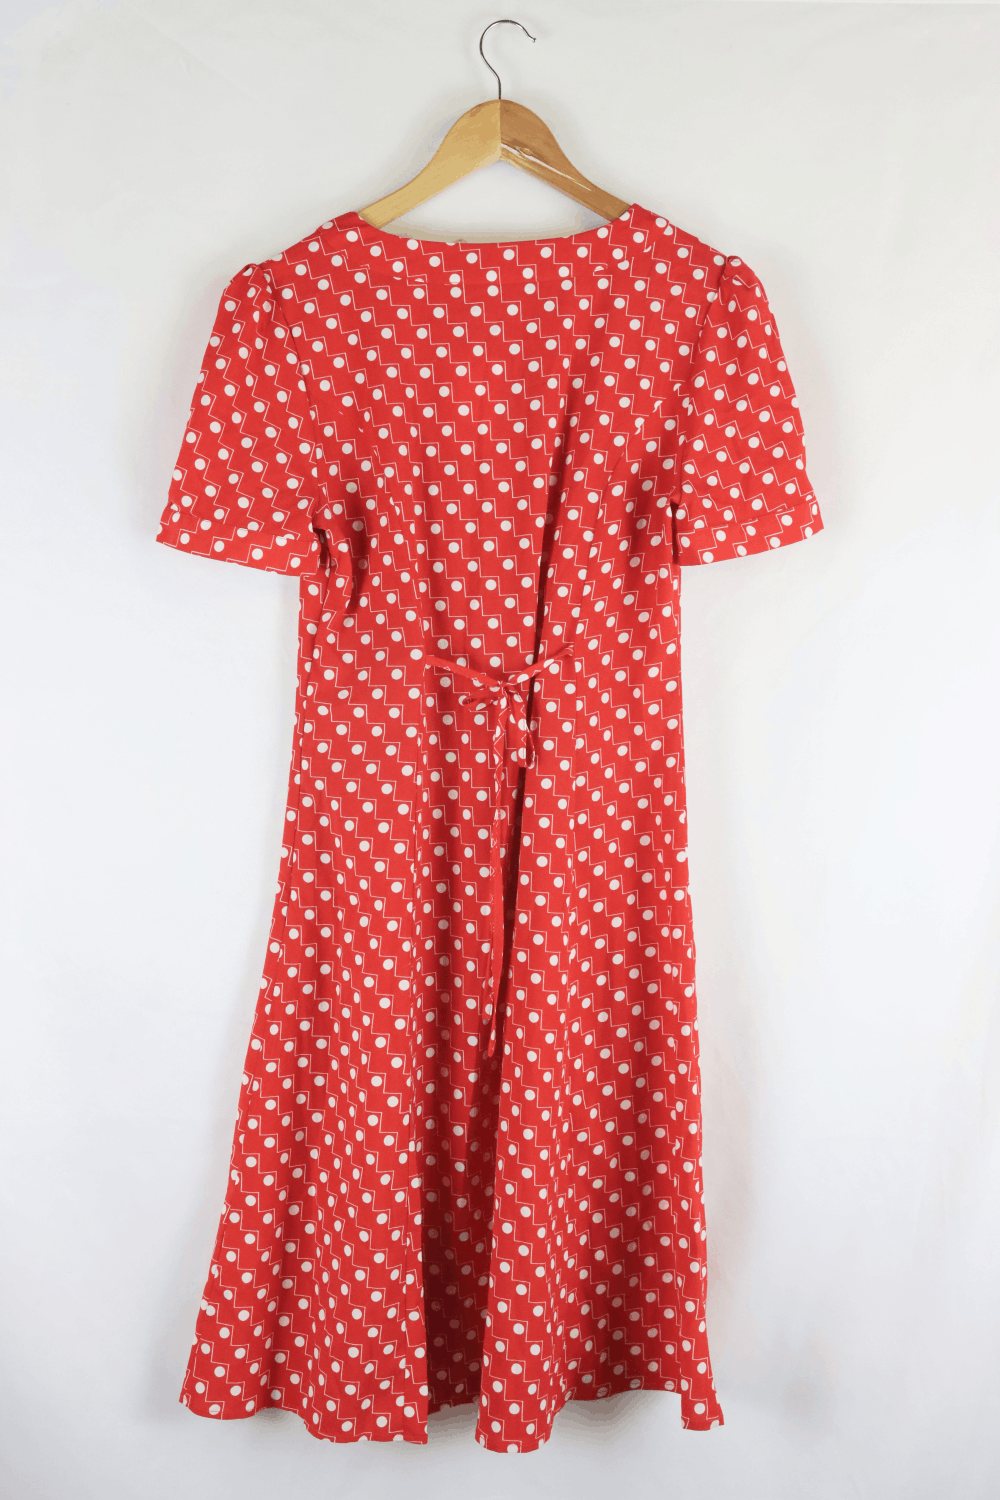 Revival Red And White Dress 10